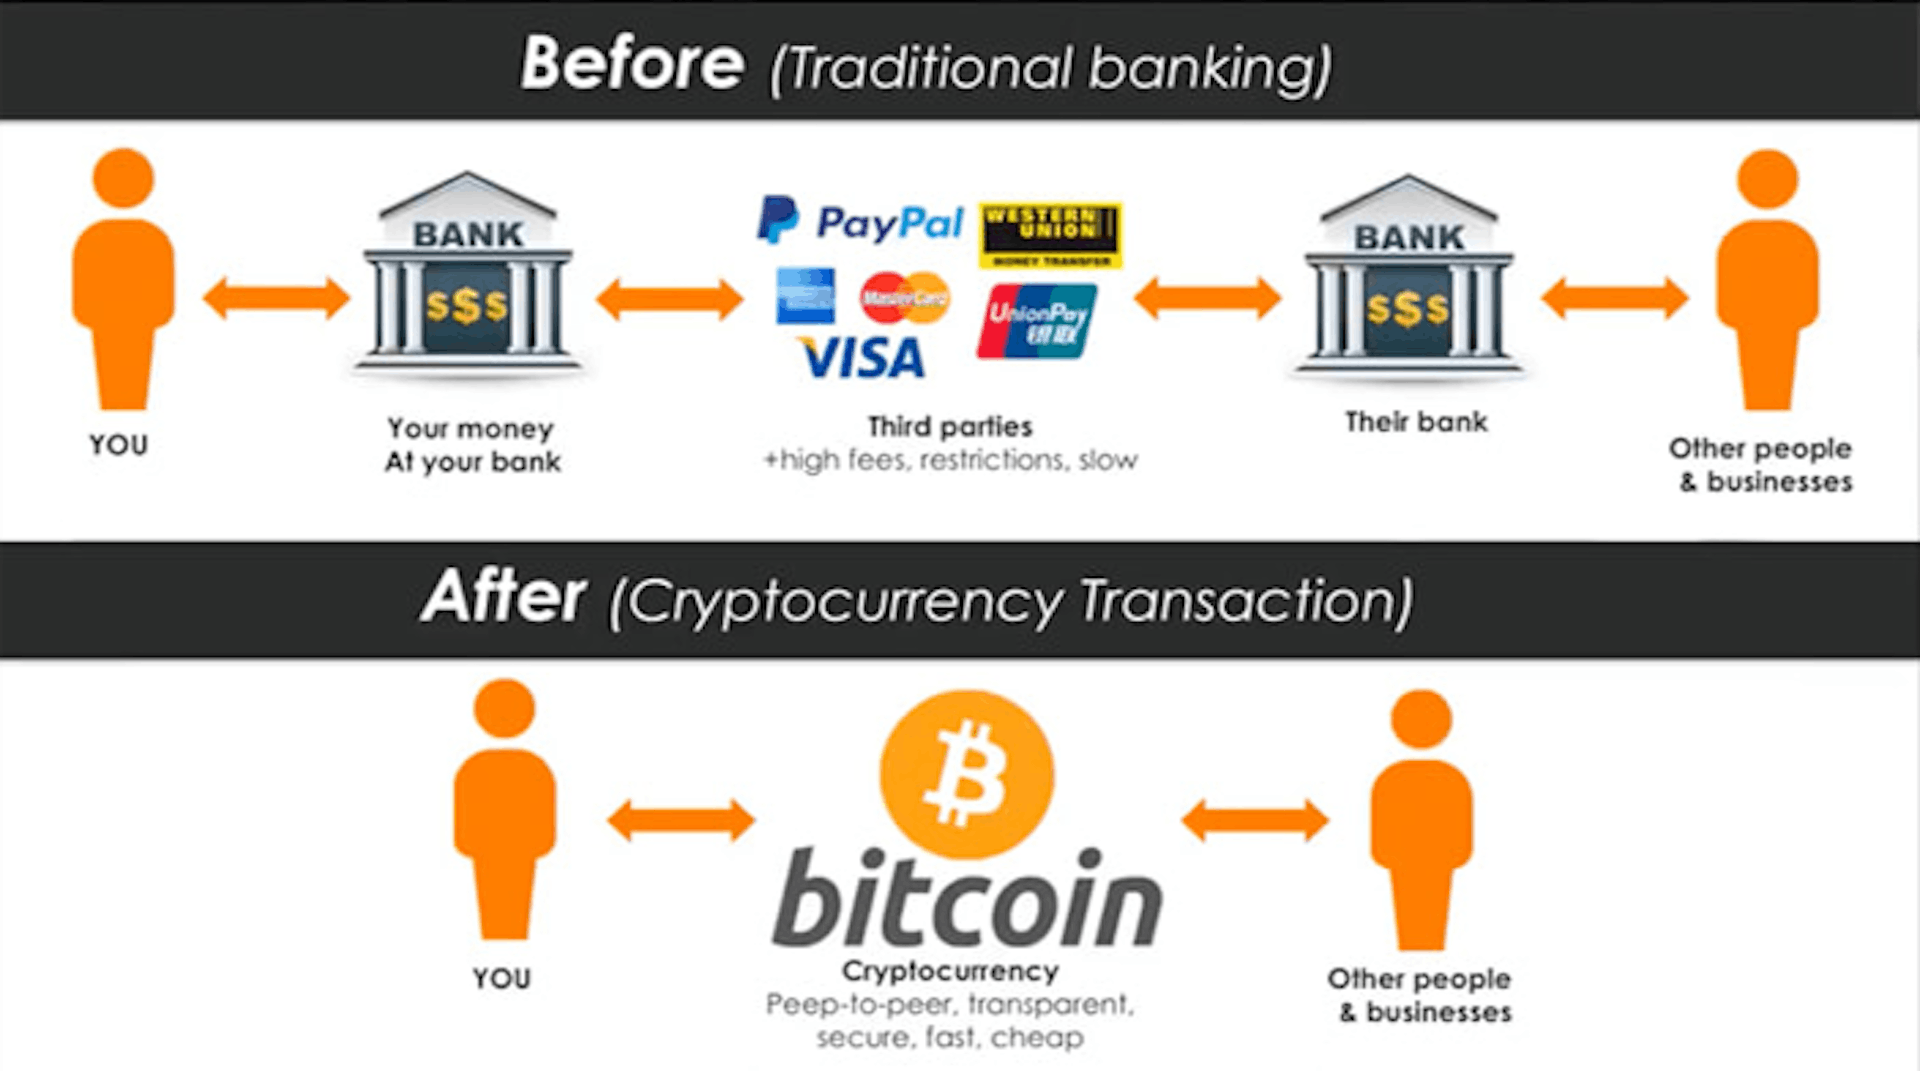 Image: Traditional banking transaction vs. cryptocurrency transaction